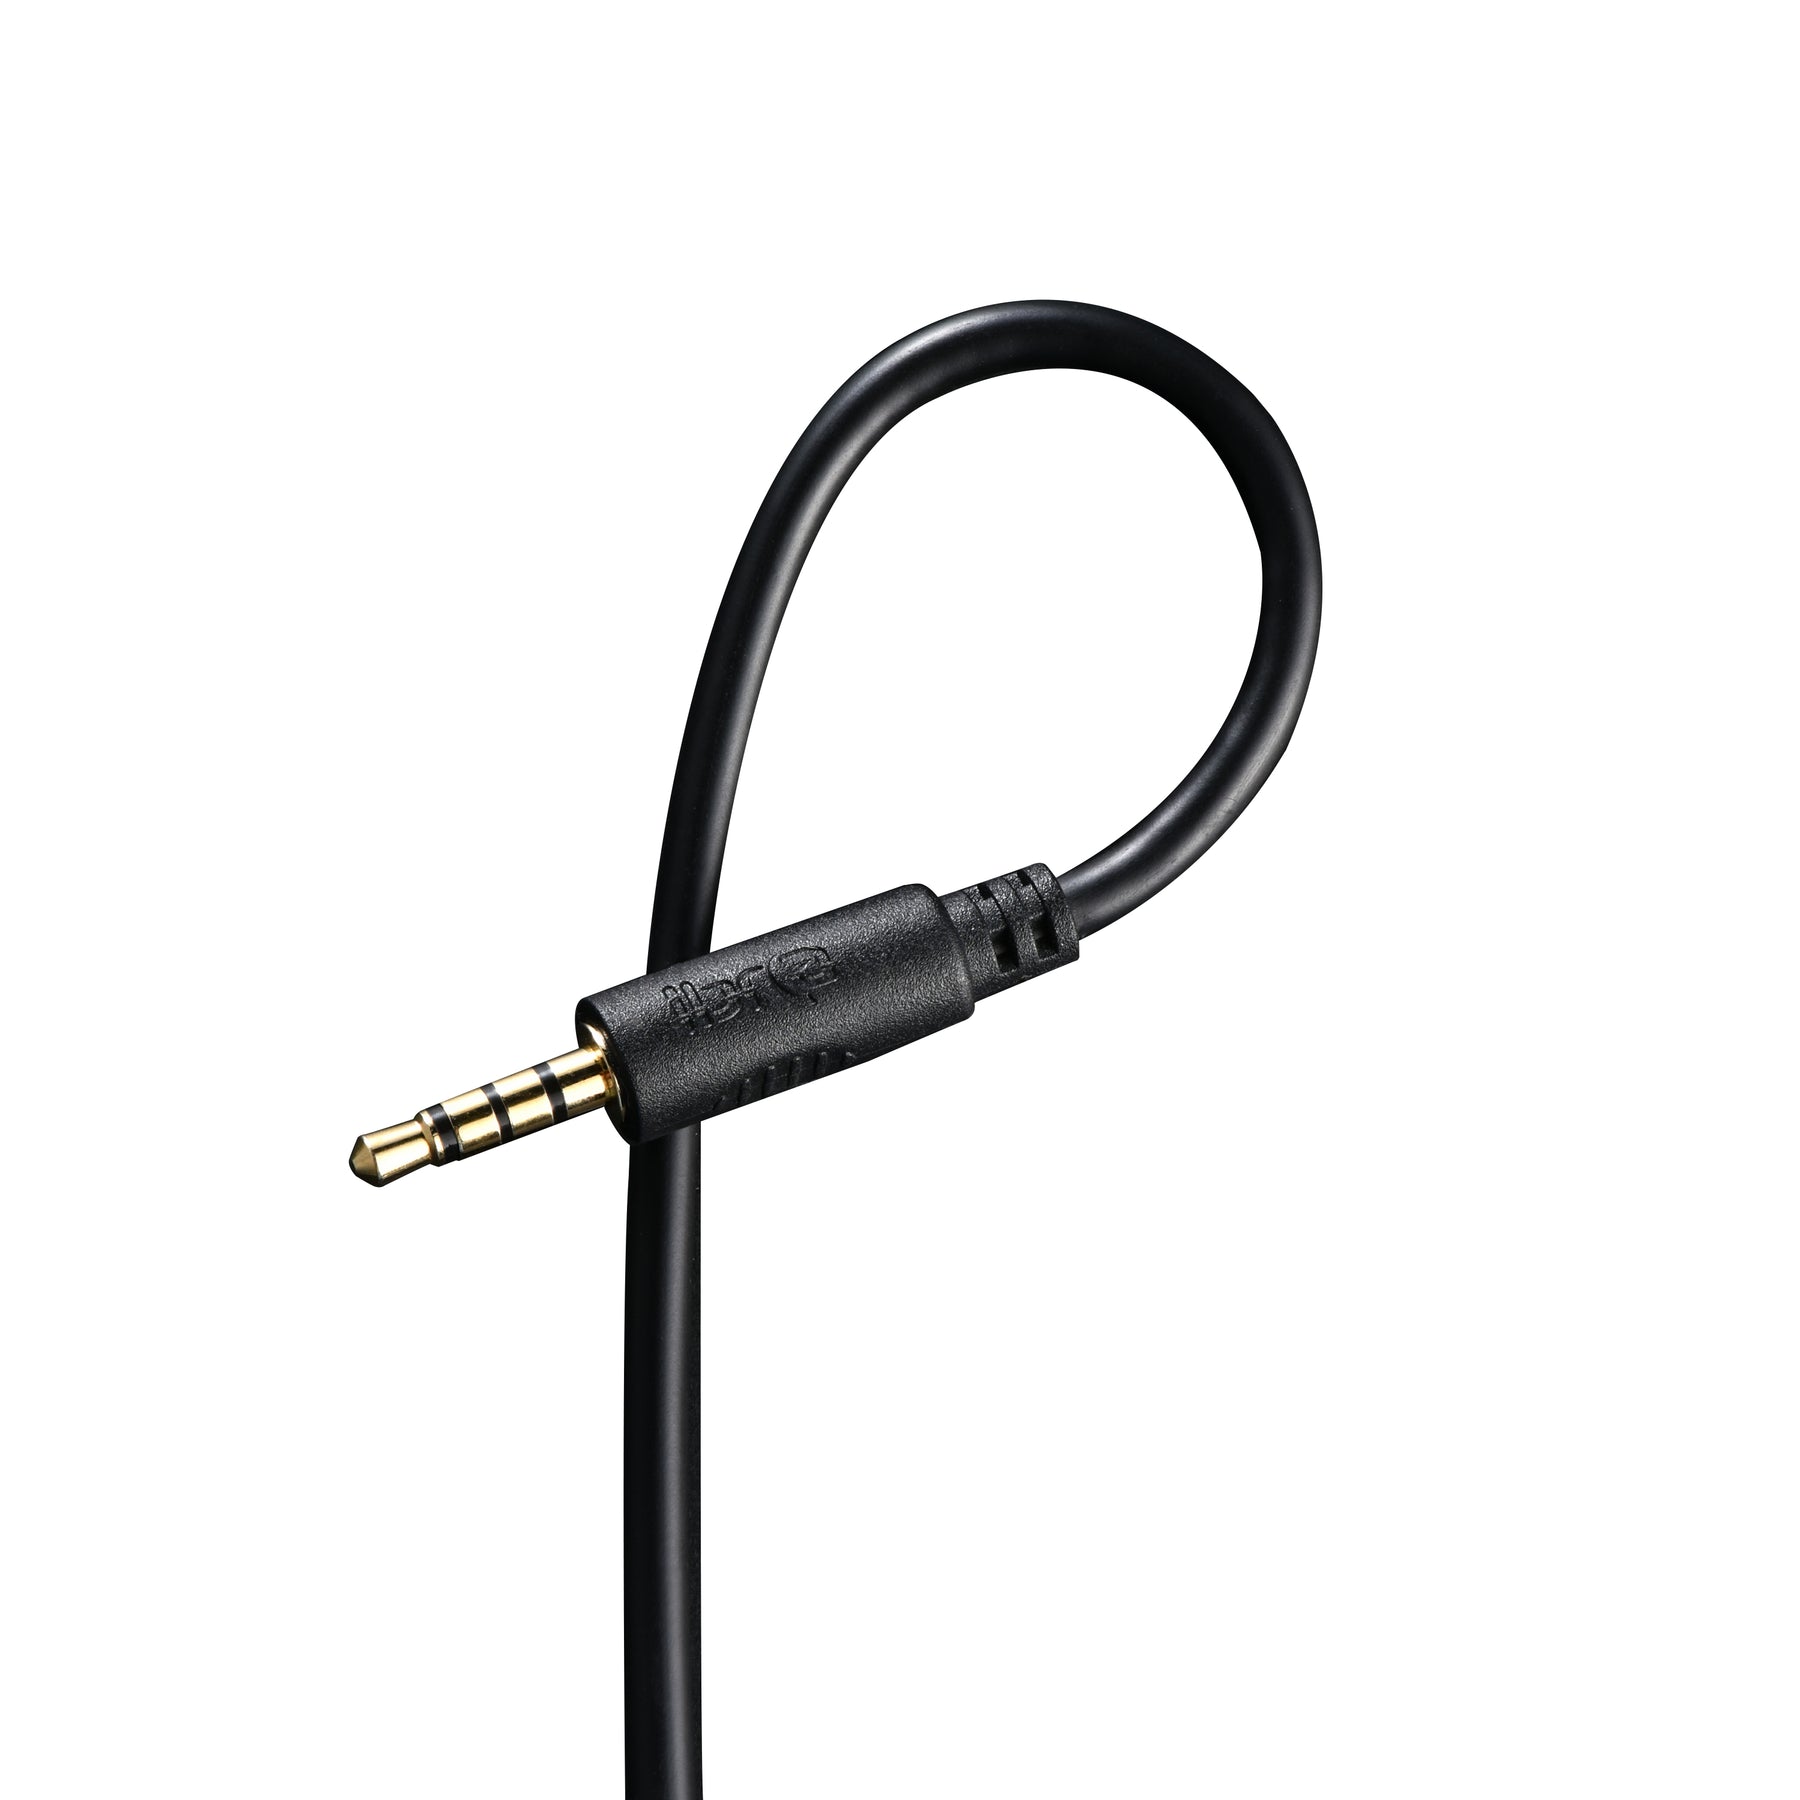 IBRA Headphone Extension Cable 3M Aux Stereo Jack Lead 3.5mm Male to Female Audio Cable Earphone Extender Cord Compatible With Laptop PC iPhone iPad Tablet Headset TV PS4 Speaker Smartphone-Black